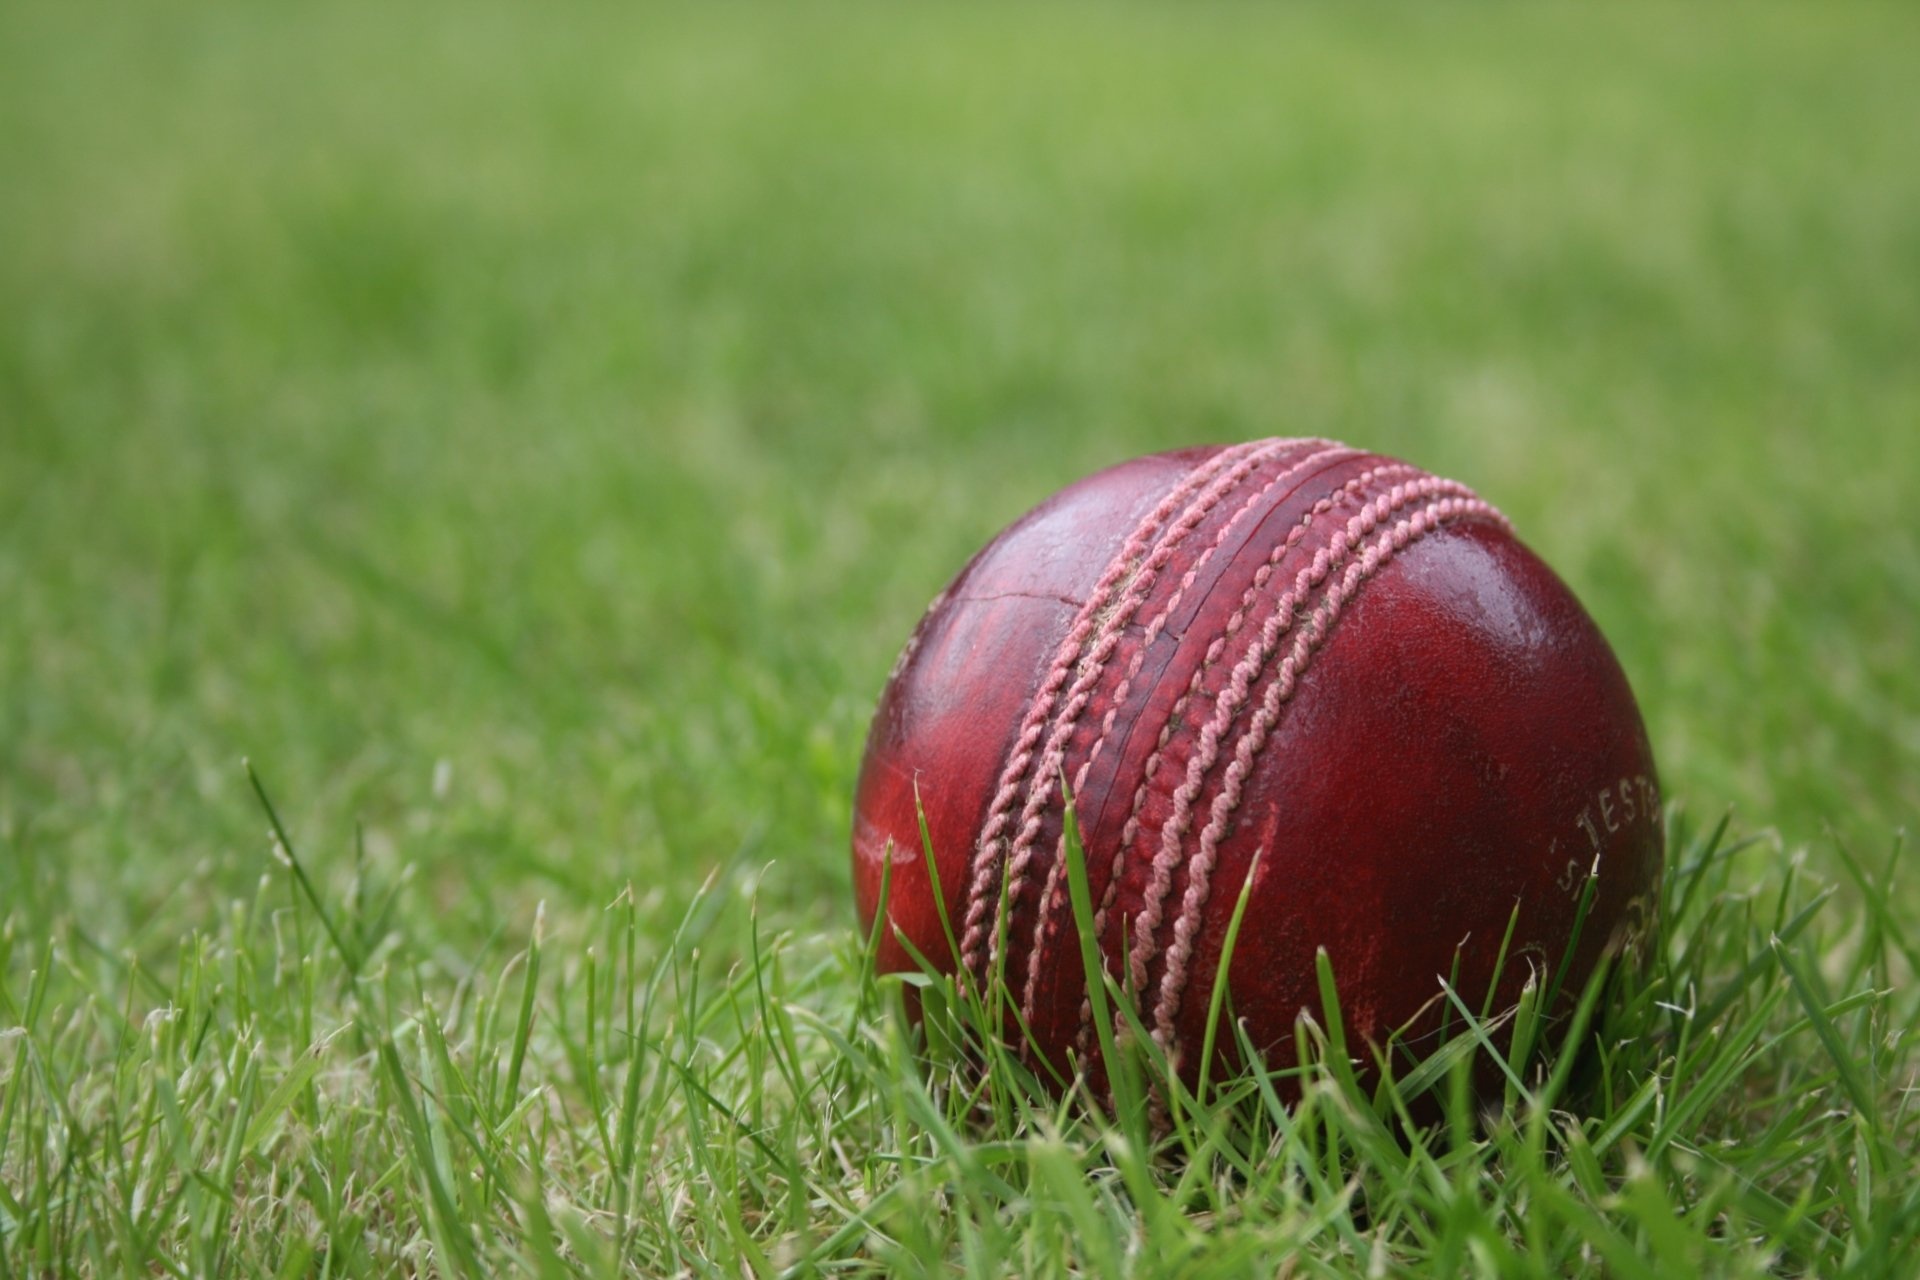 Cricket: First-class level cricket ball - hard and solid ball, The Lord's Test ball. 1920x1280 HD Background.